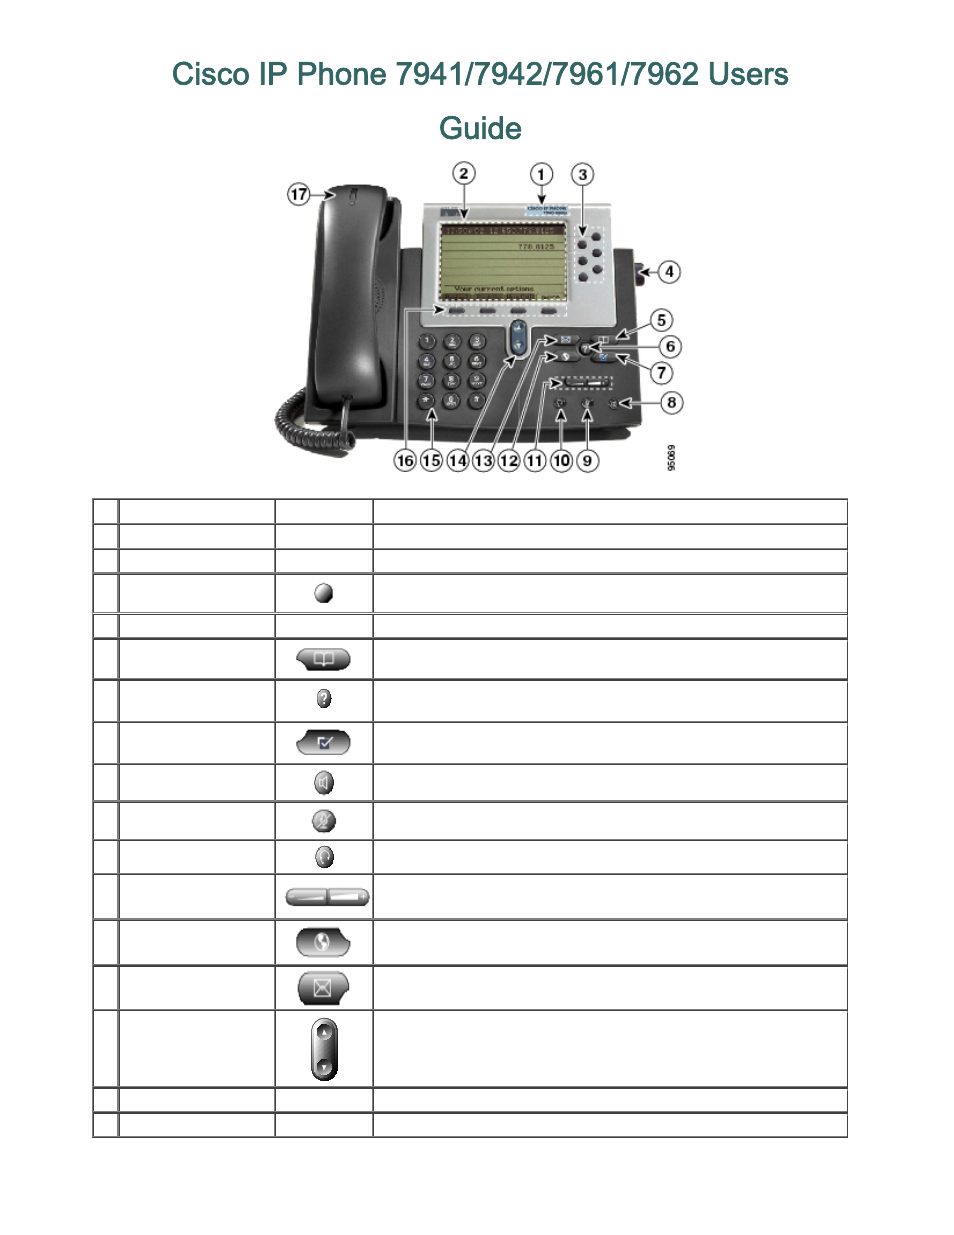 Cisco IP Phone 7941 User Manual | 6 pages | Also for: IP Phone 7942, IP  Phone 7961, IP Phone 7962